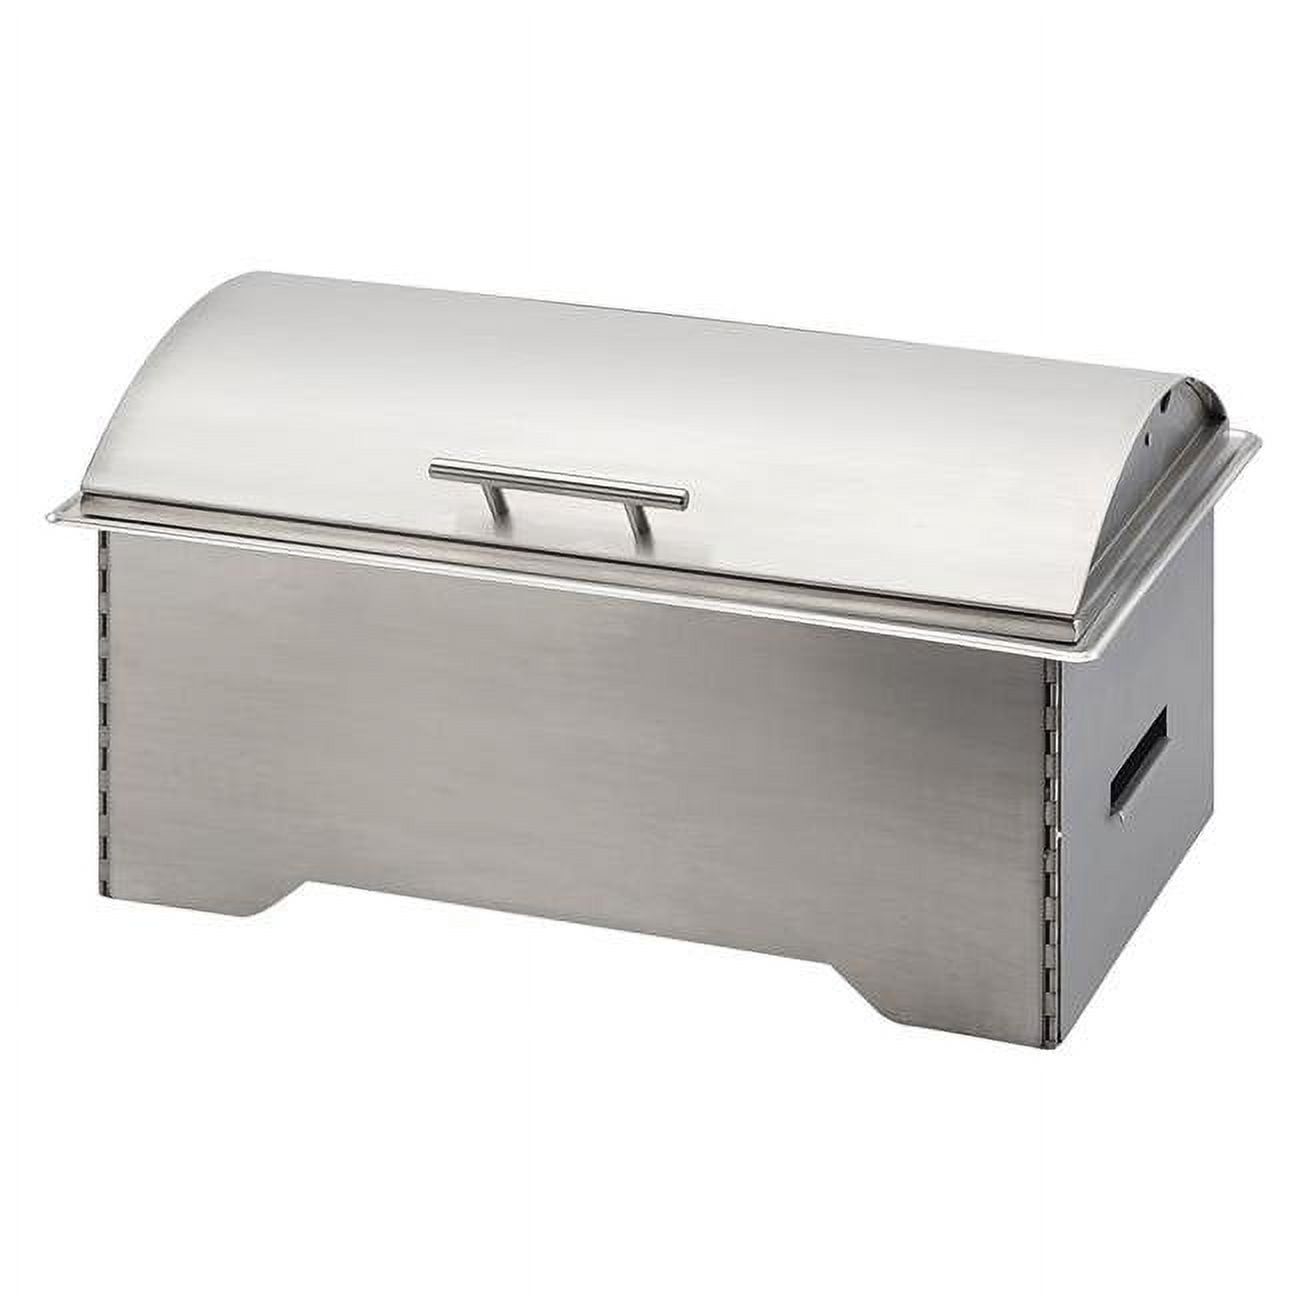 Picture of Cal Mil 3644-55 8 qt. Full Size Stainless Steel Collapsible Chafer - 21 x 13 x 11.25 in.